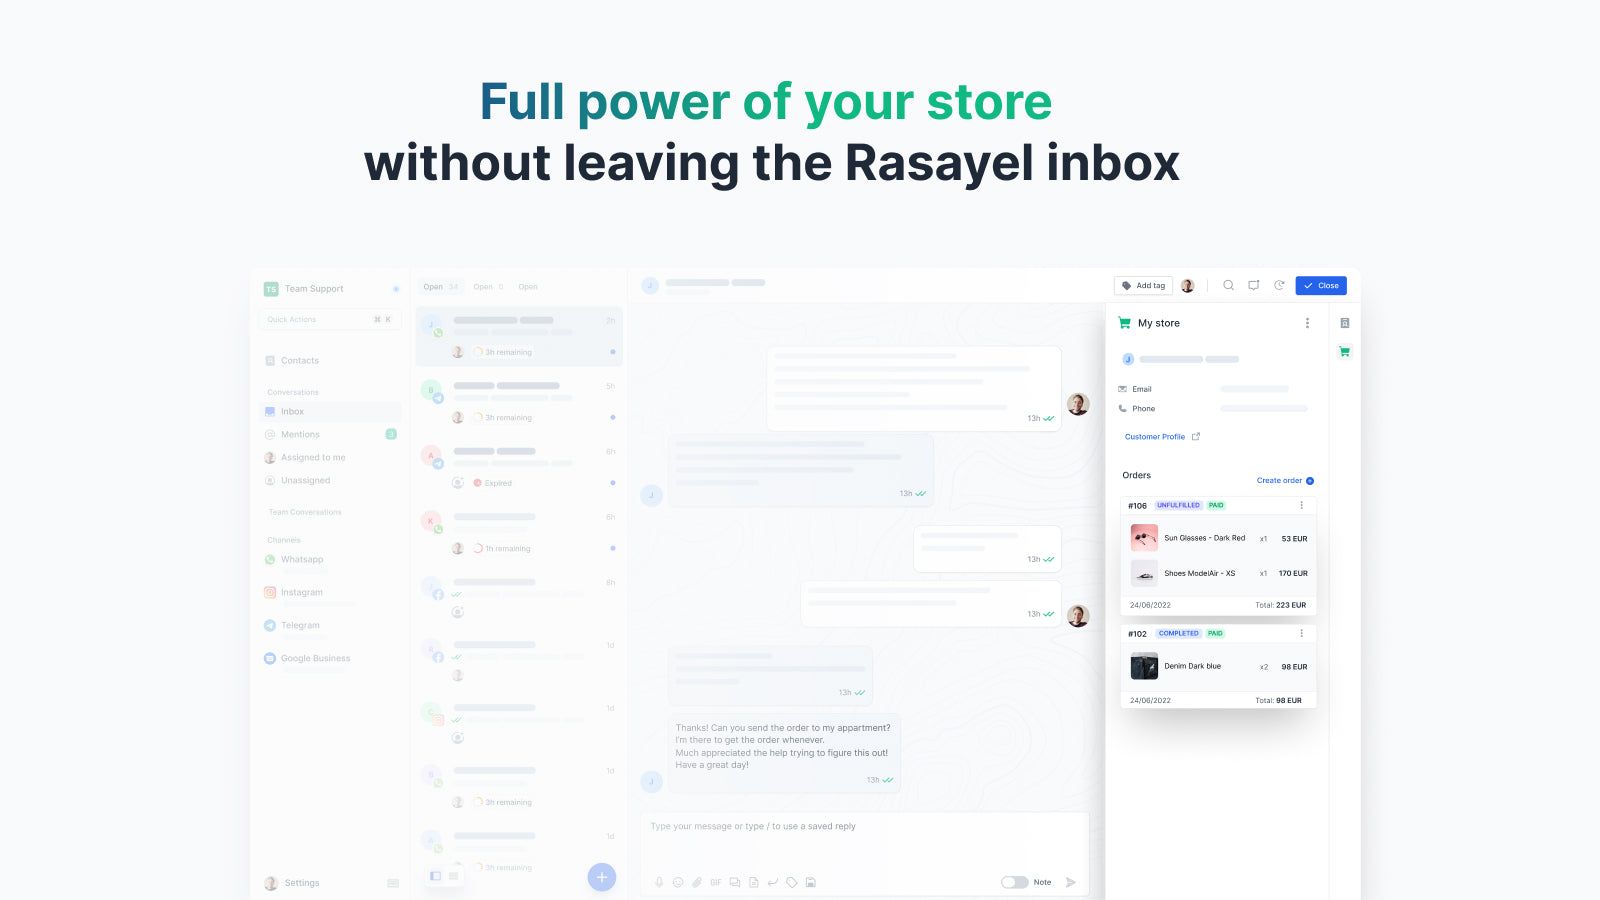 Full power of your store without leaving the Rasayel inbox